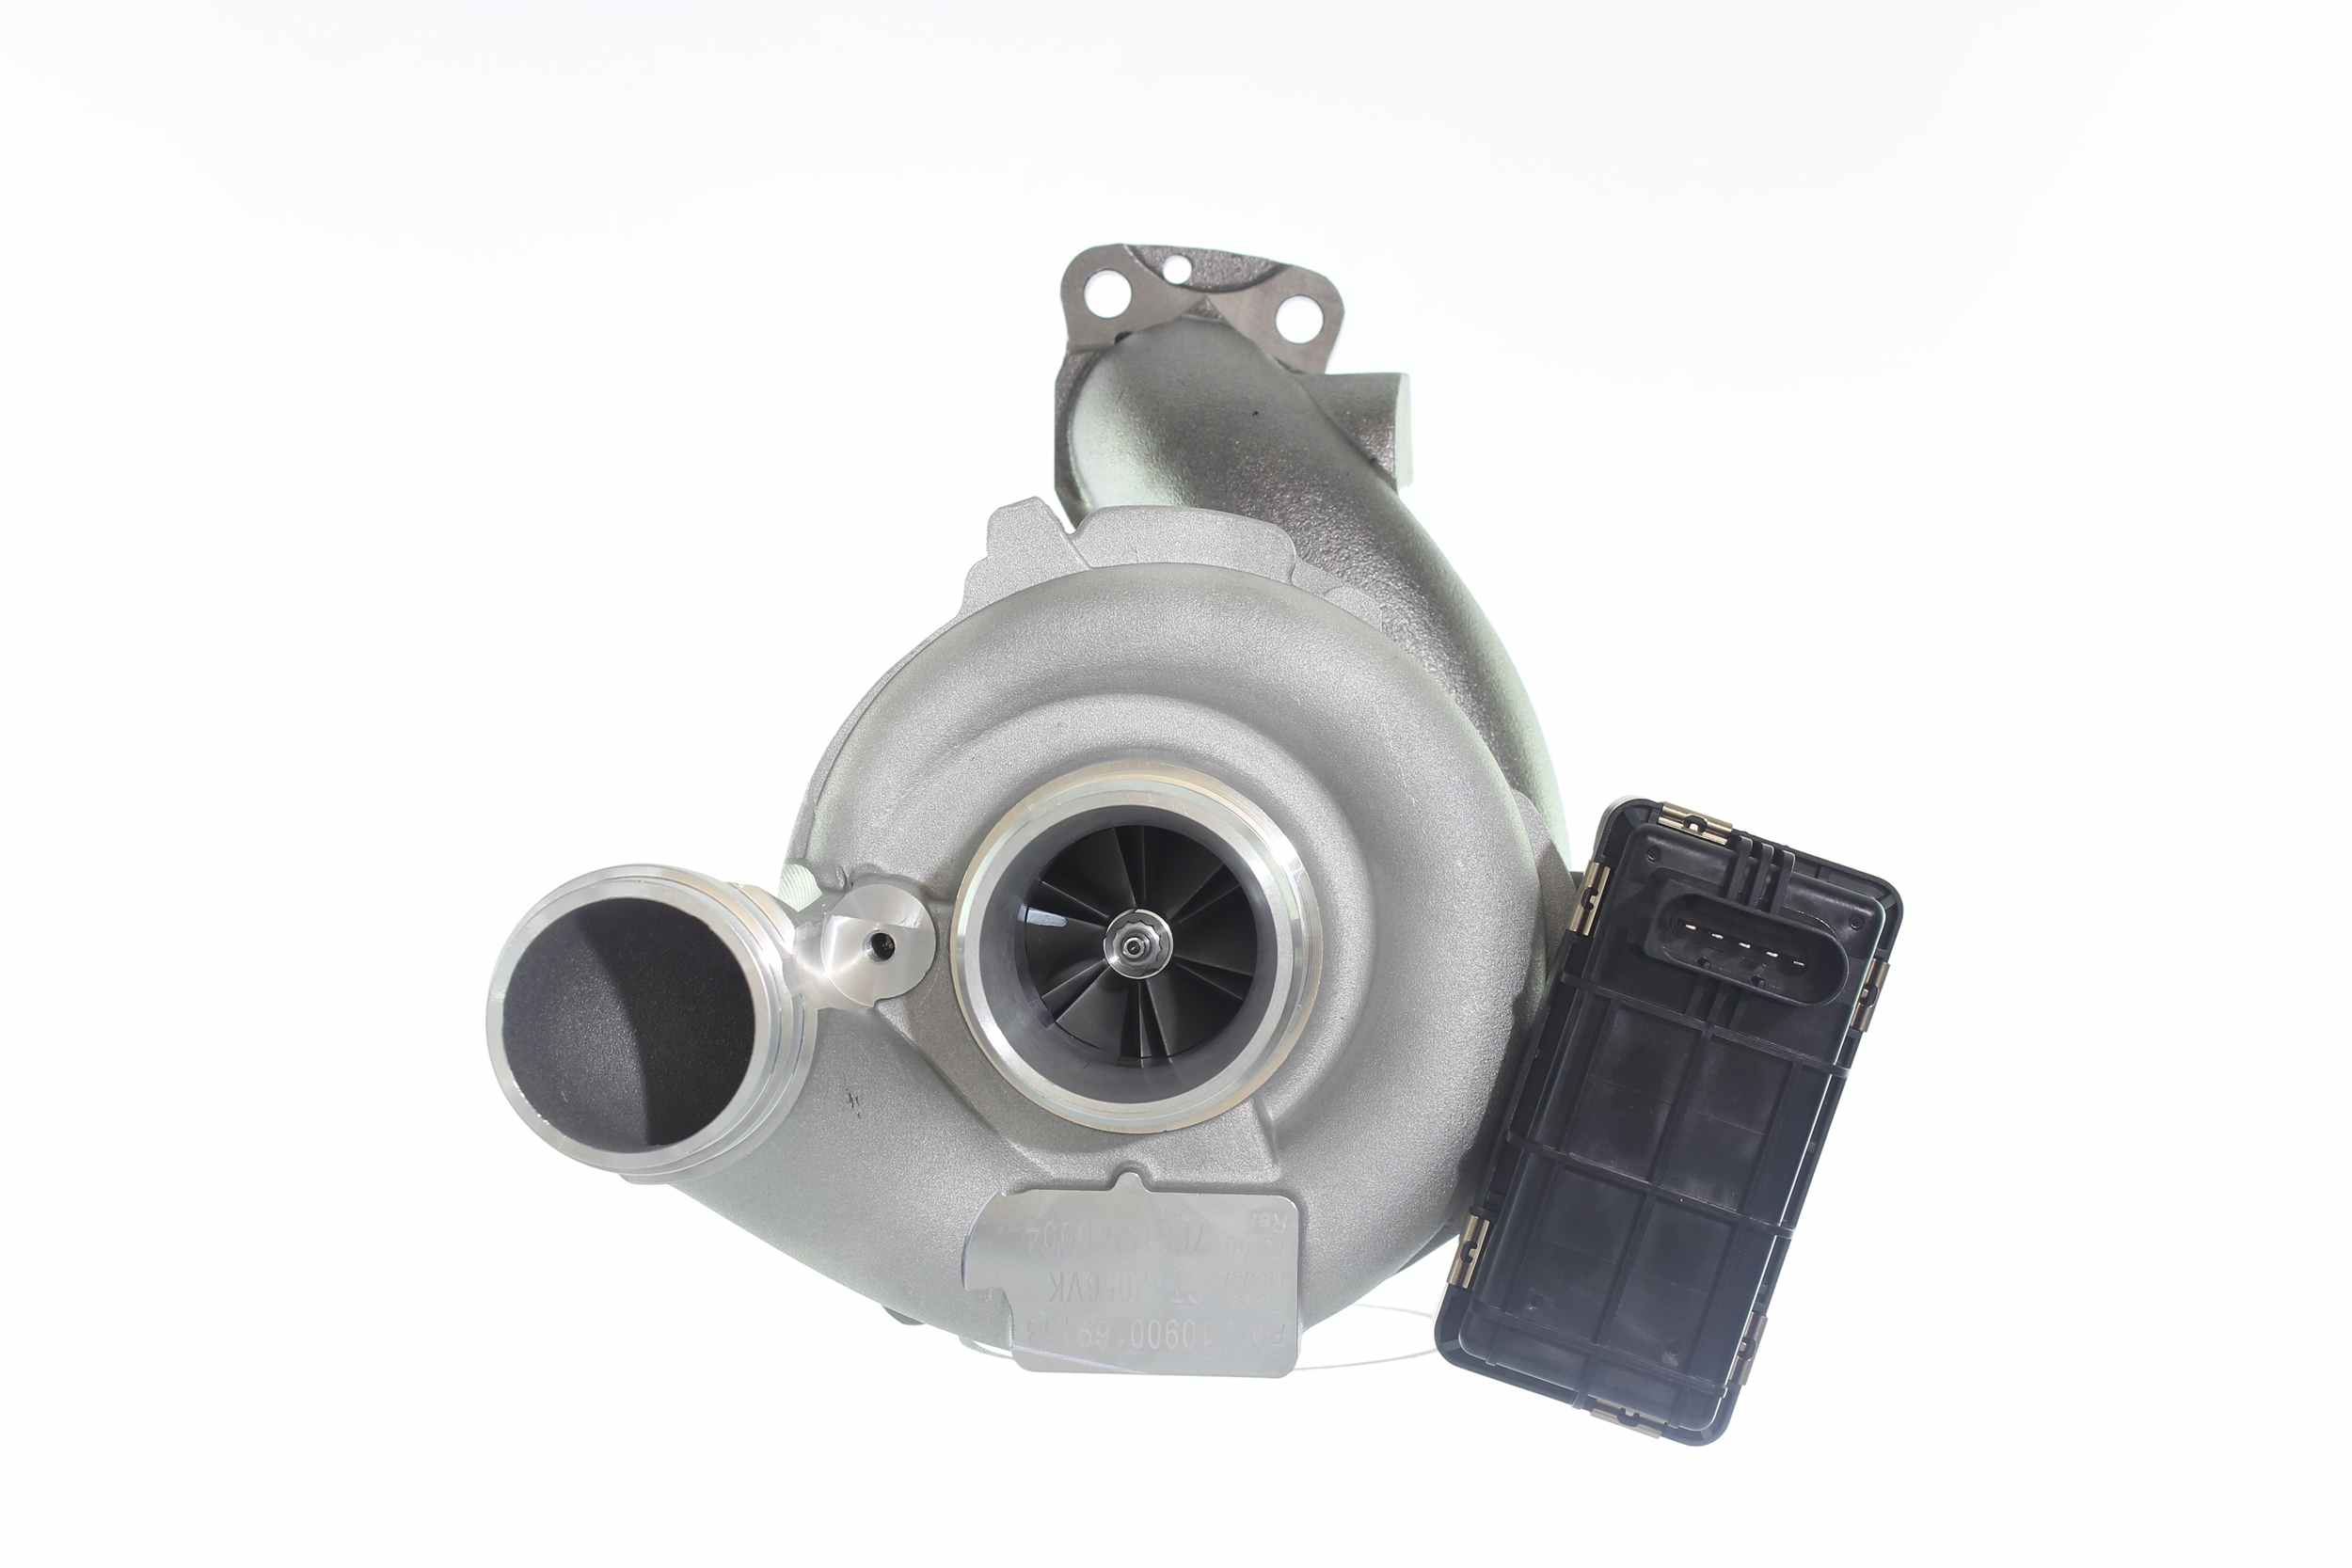 ALANKO 10900169 Turbocharger Exhaust Turbocharger, Incl. Gasket Set, with attachment material